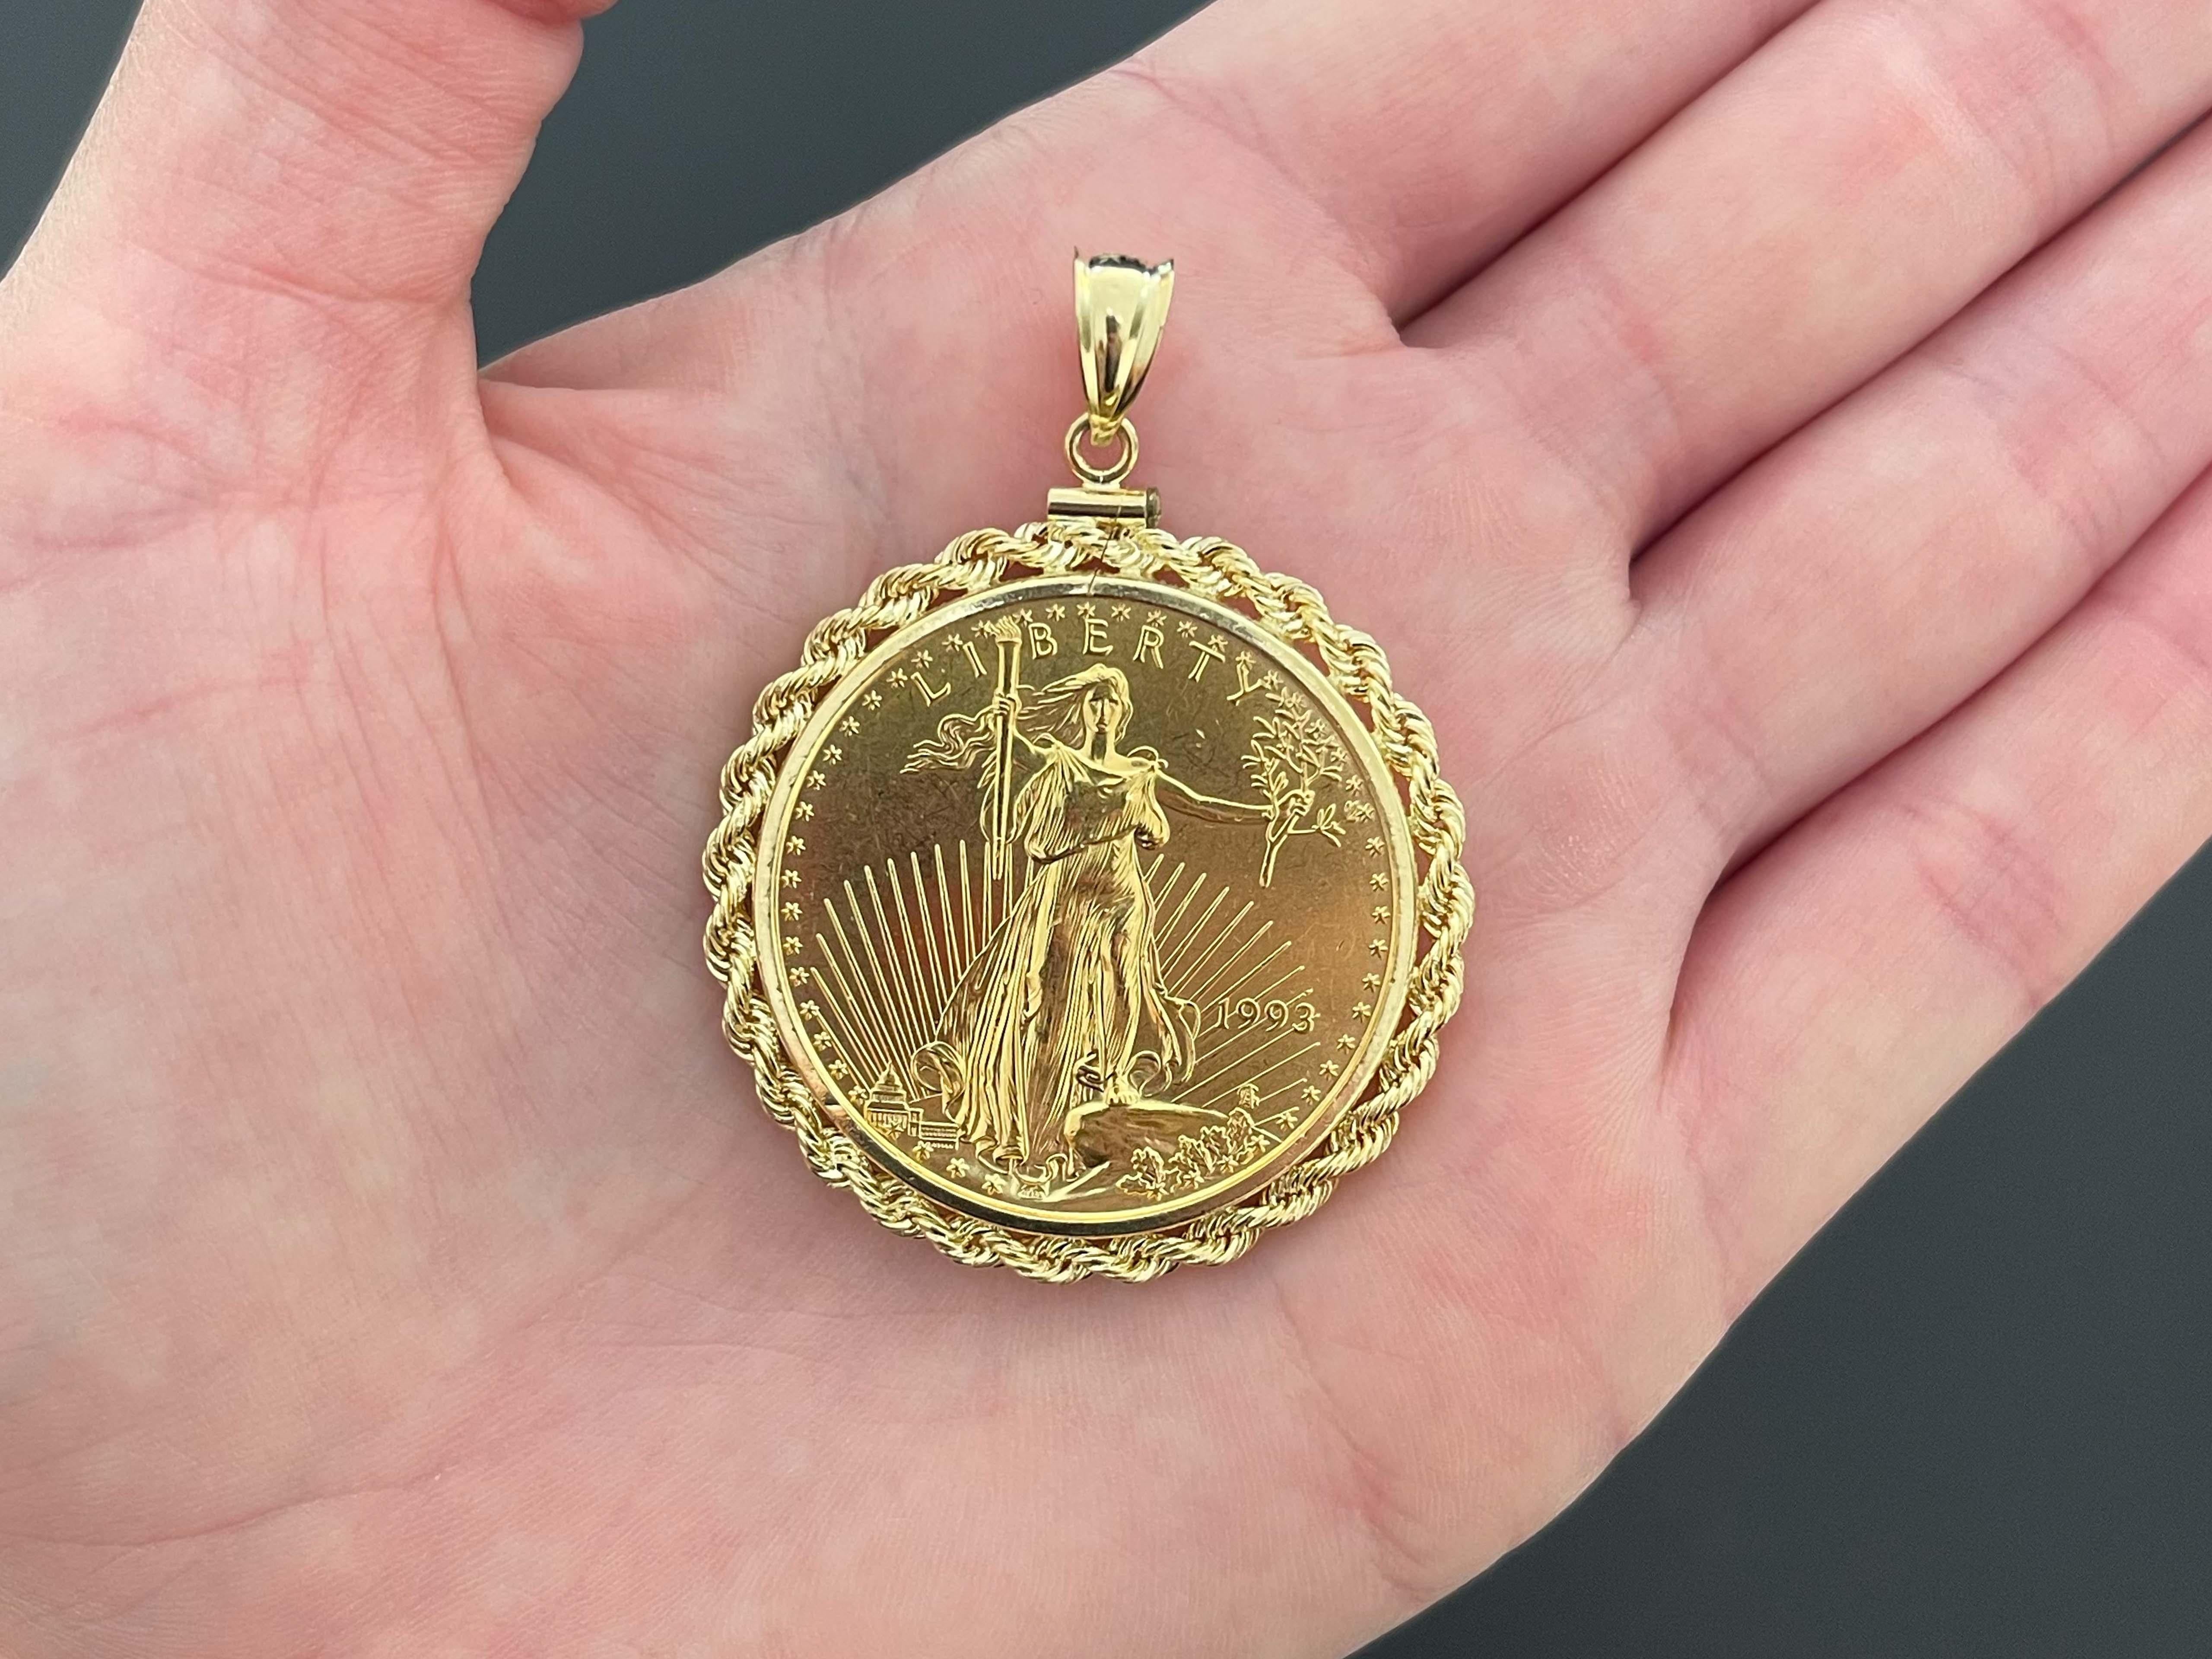 This pendant contains one $50 American Eagle gold coin with 1 ounce of pure gold. The coin is set in a 14K gold rope design bezel. The pendant is 1.5